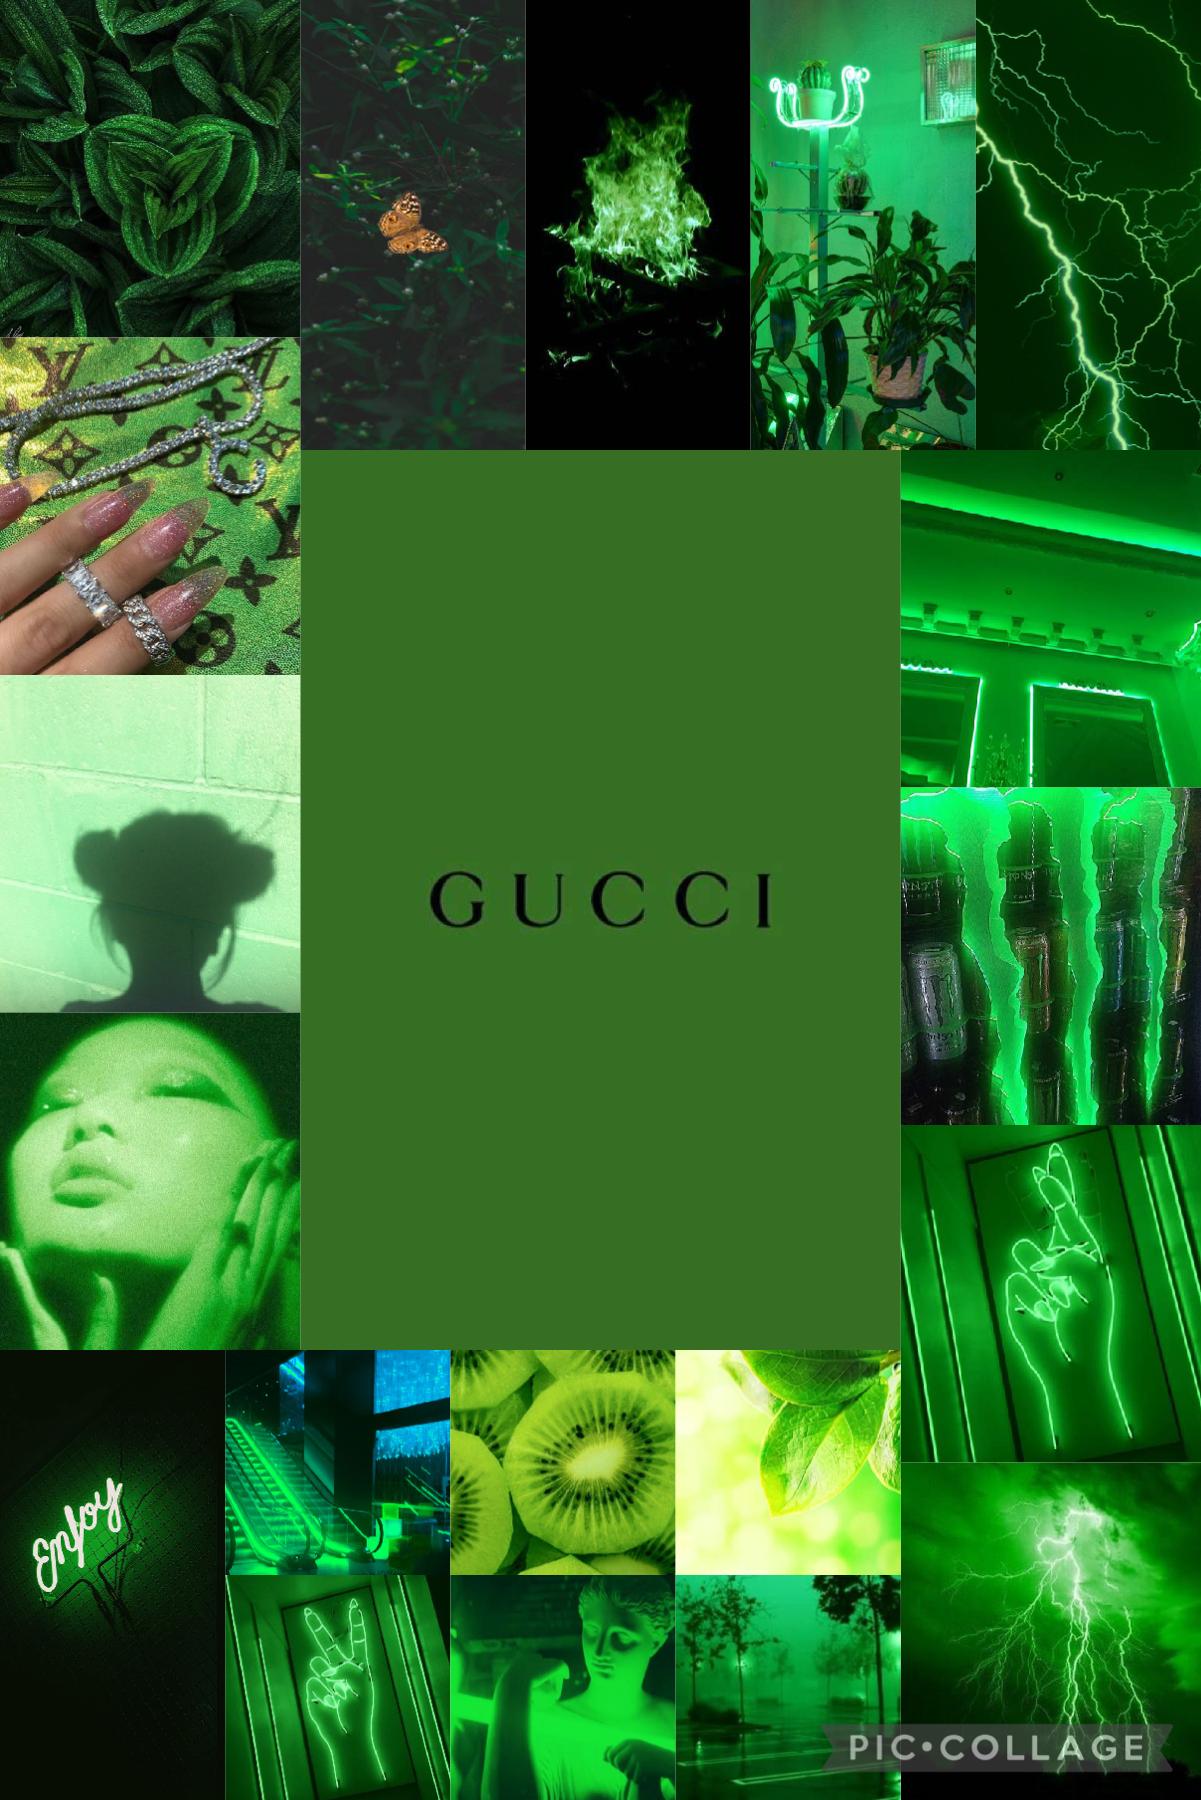 💚🔫🐍TaP🐍🔫💚
Here’s a green aesthetic, I think it gives off a rebel vibe. Just me?